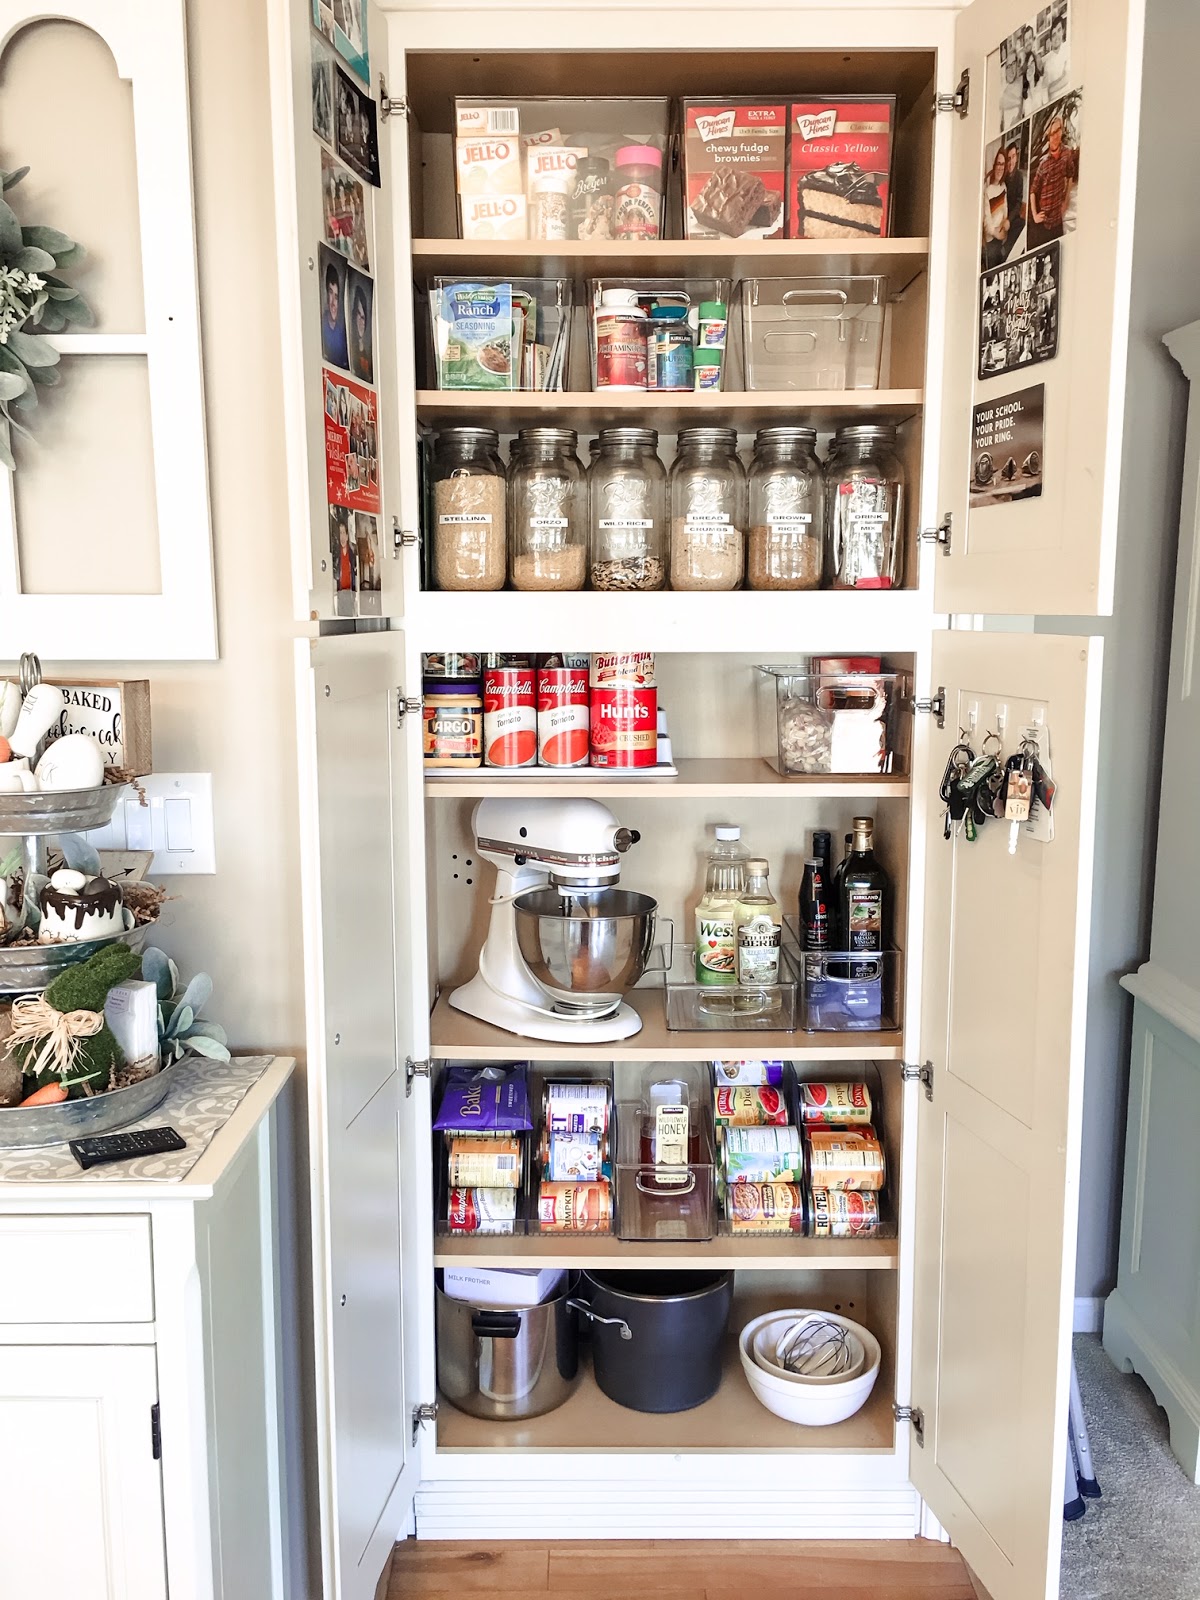 Pantry Storage Solutions For Small Spaces - Best Design Idea